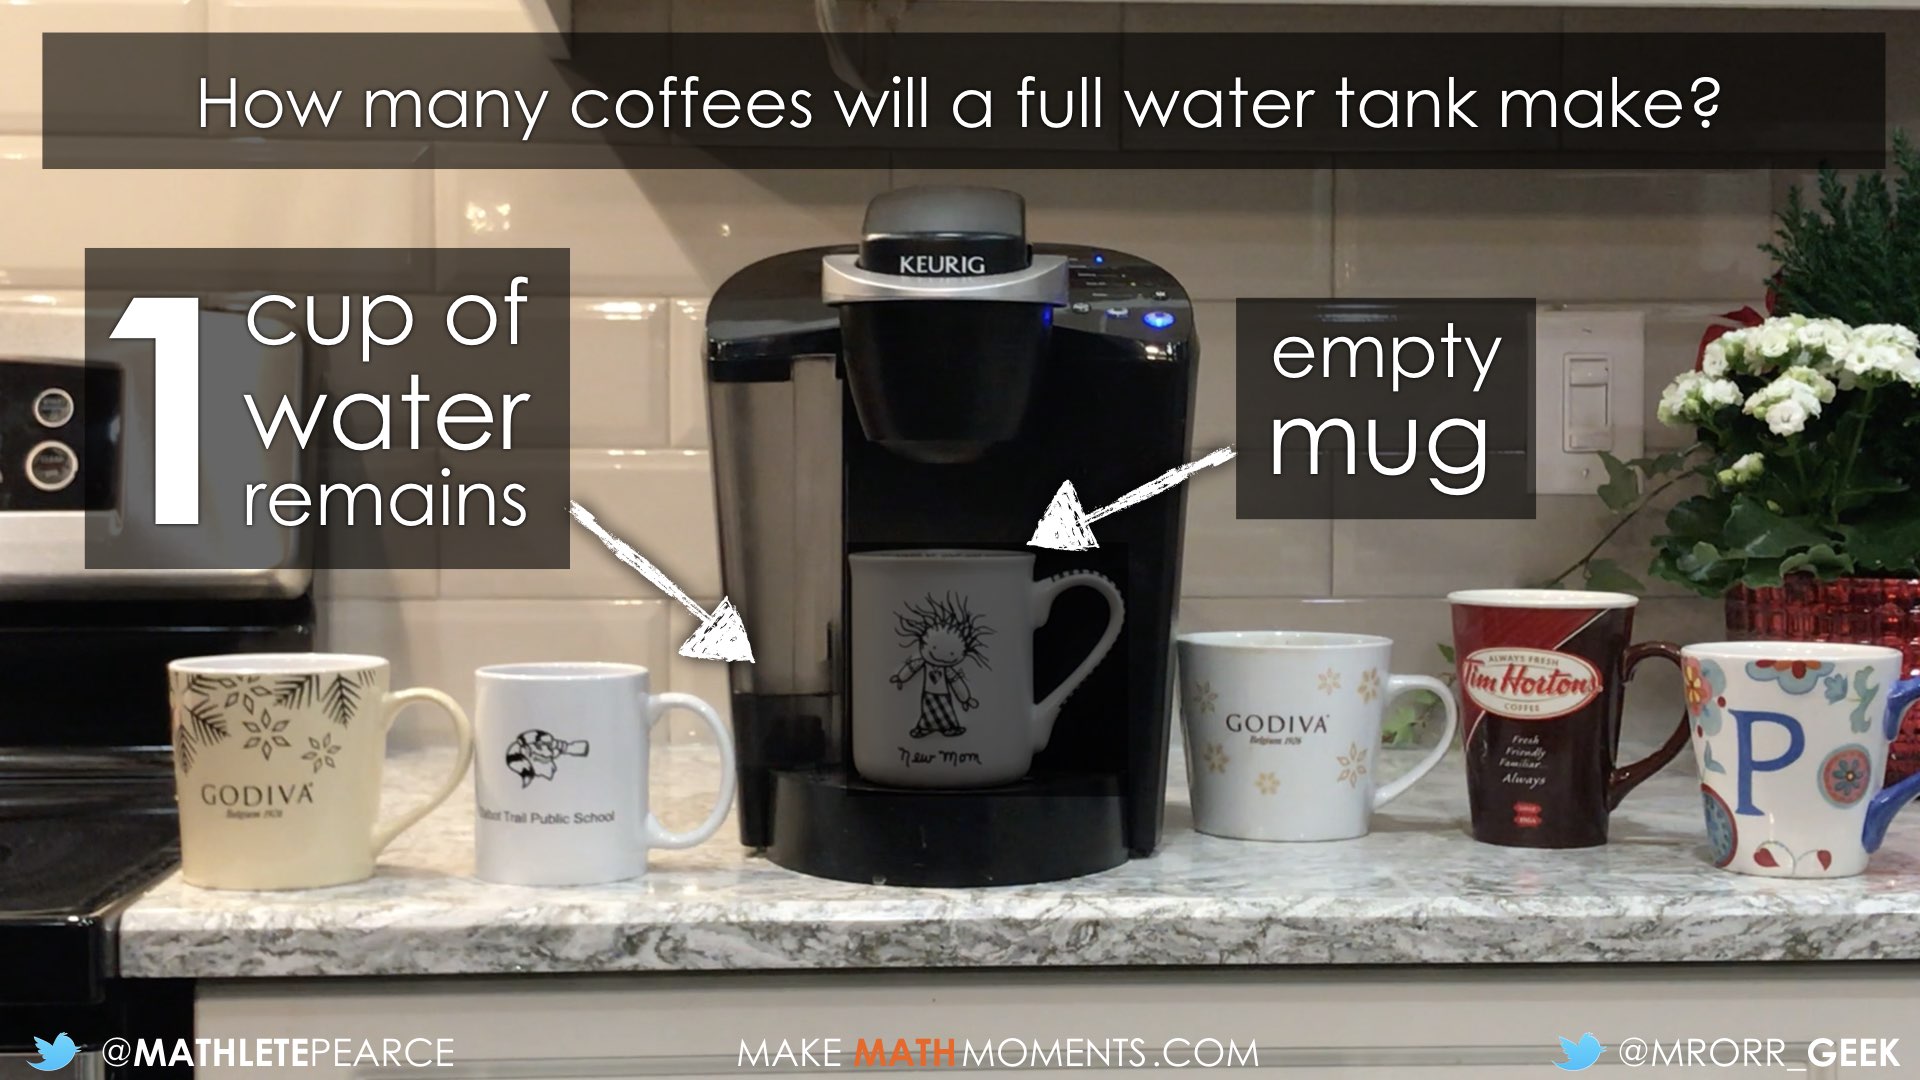 Coffee Quantity EXTENSION - How many coffees will a full water tank make?